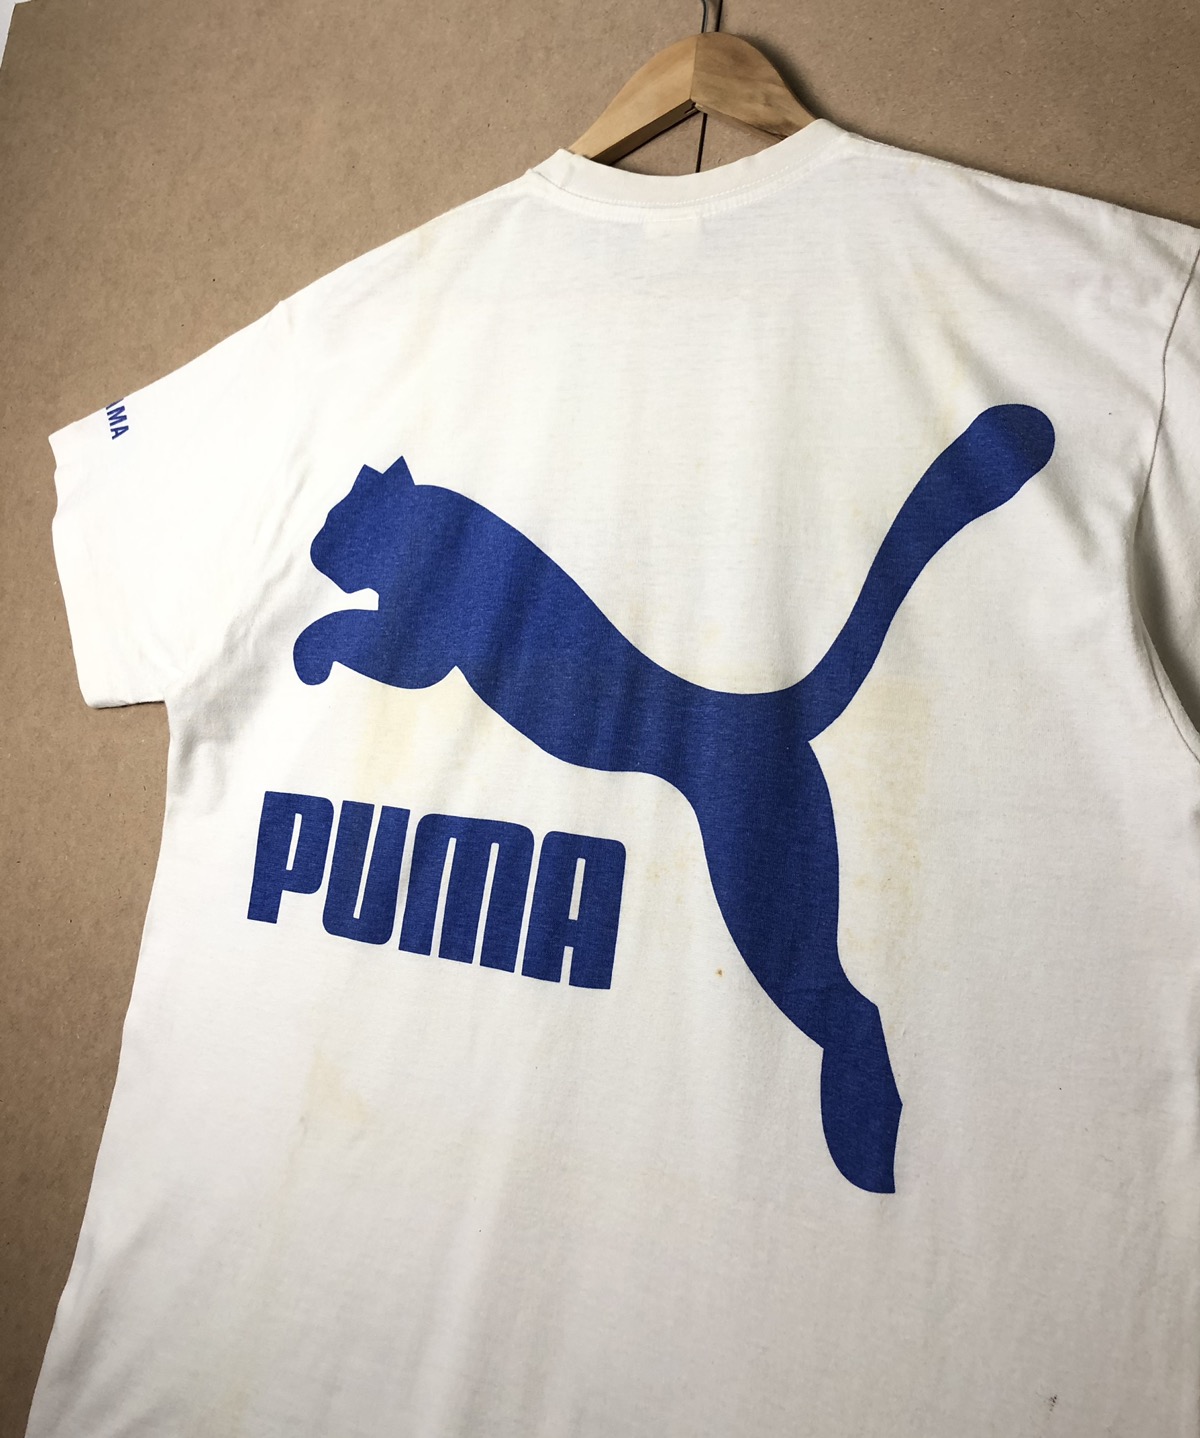 VTG 90s PUMA SHIRT AS FLUGELS WITH SPELL OUT BIG LOGO - 12